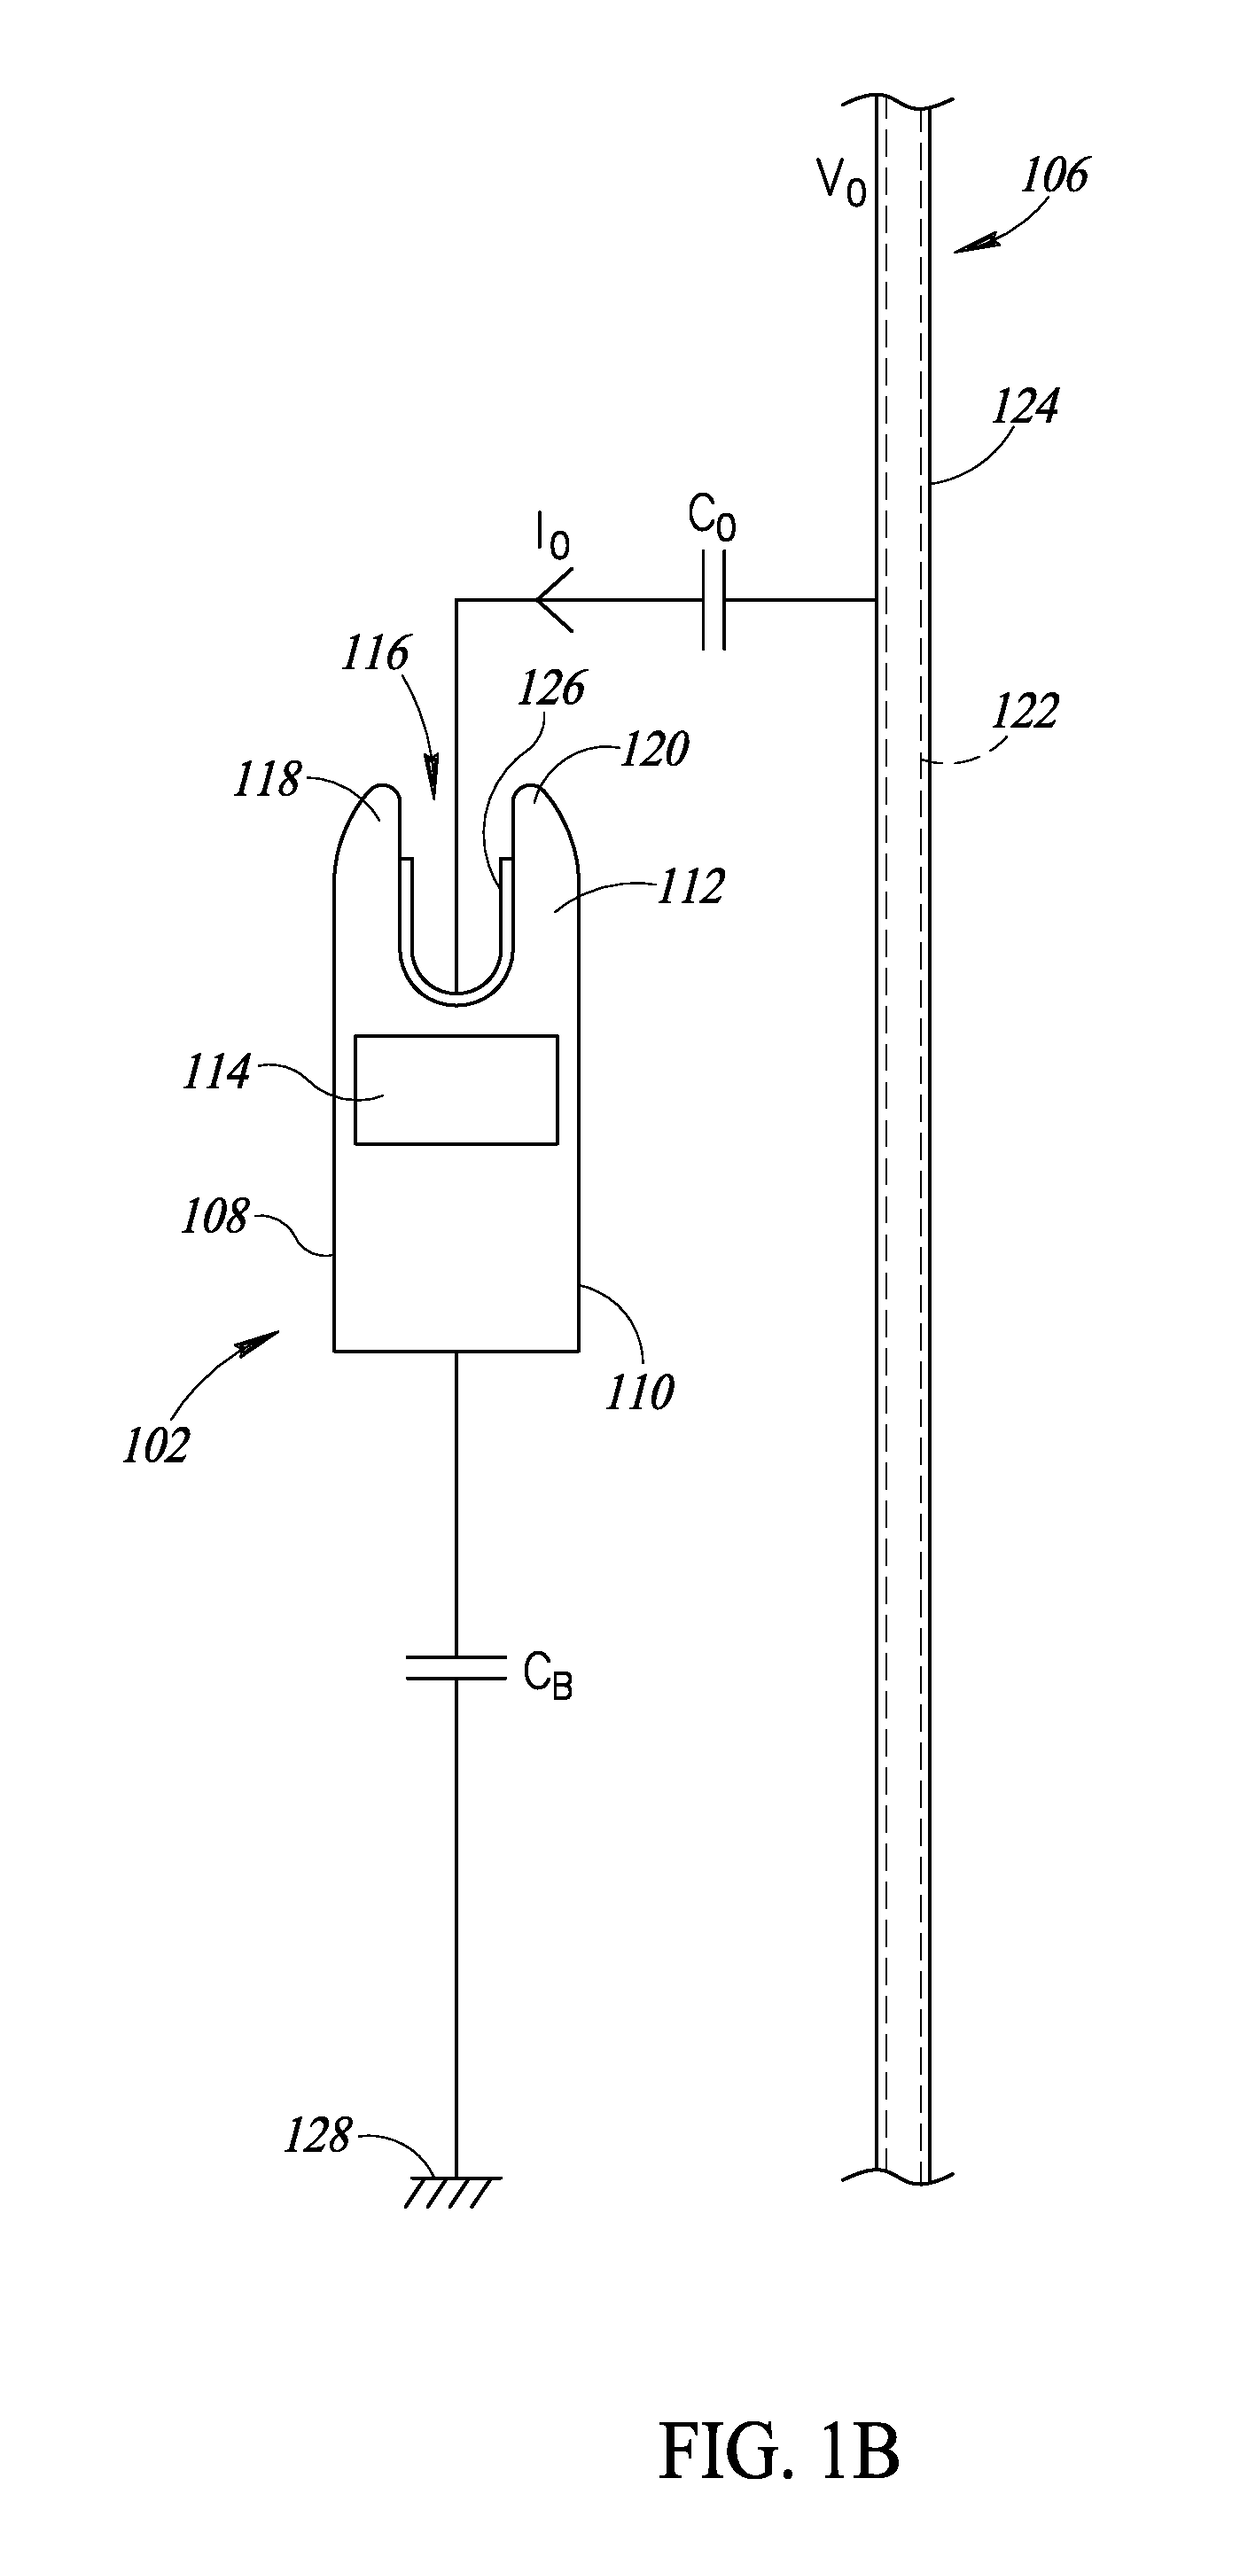 Non-contact electrical parameter measurement systems